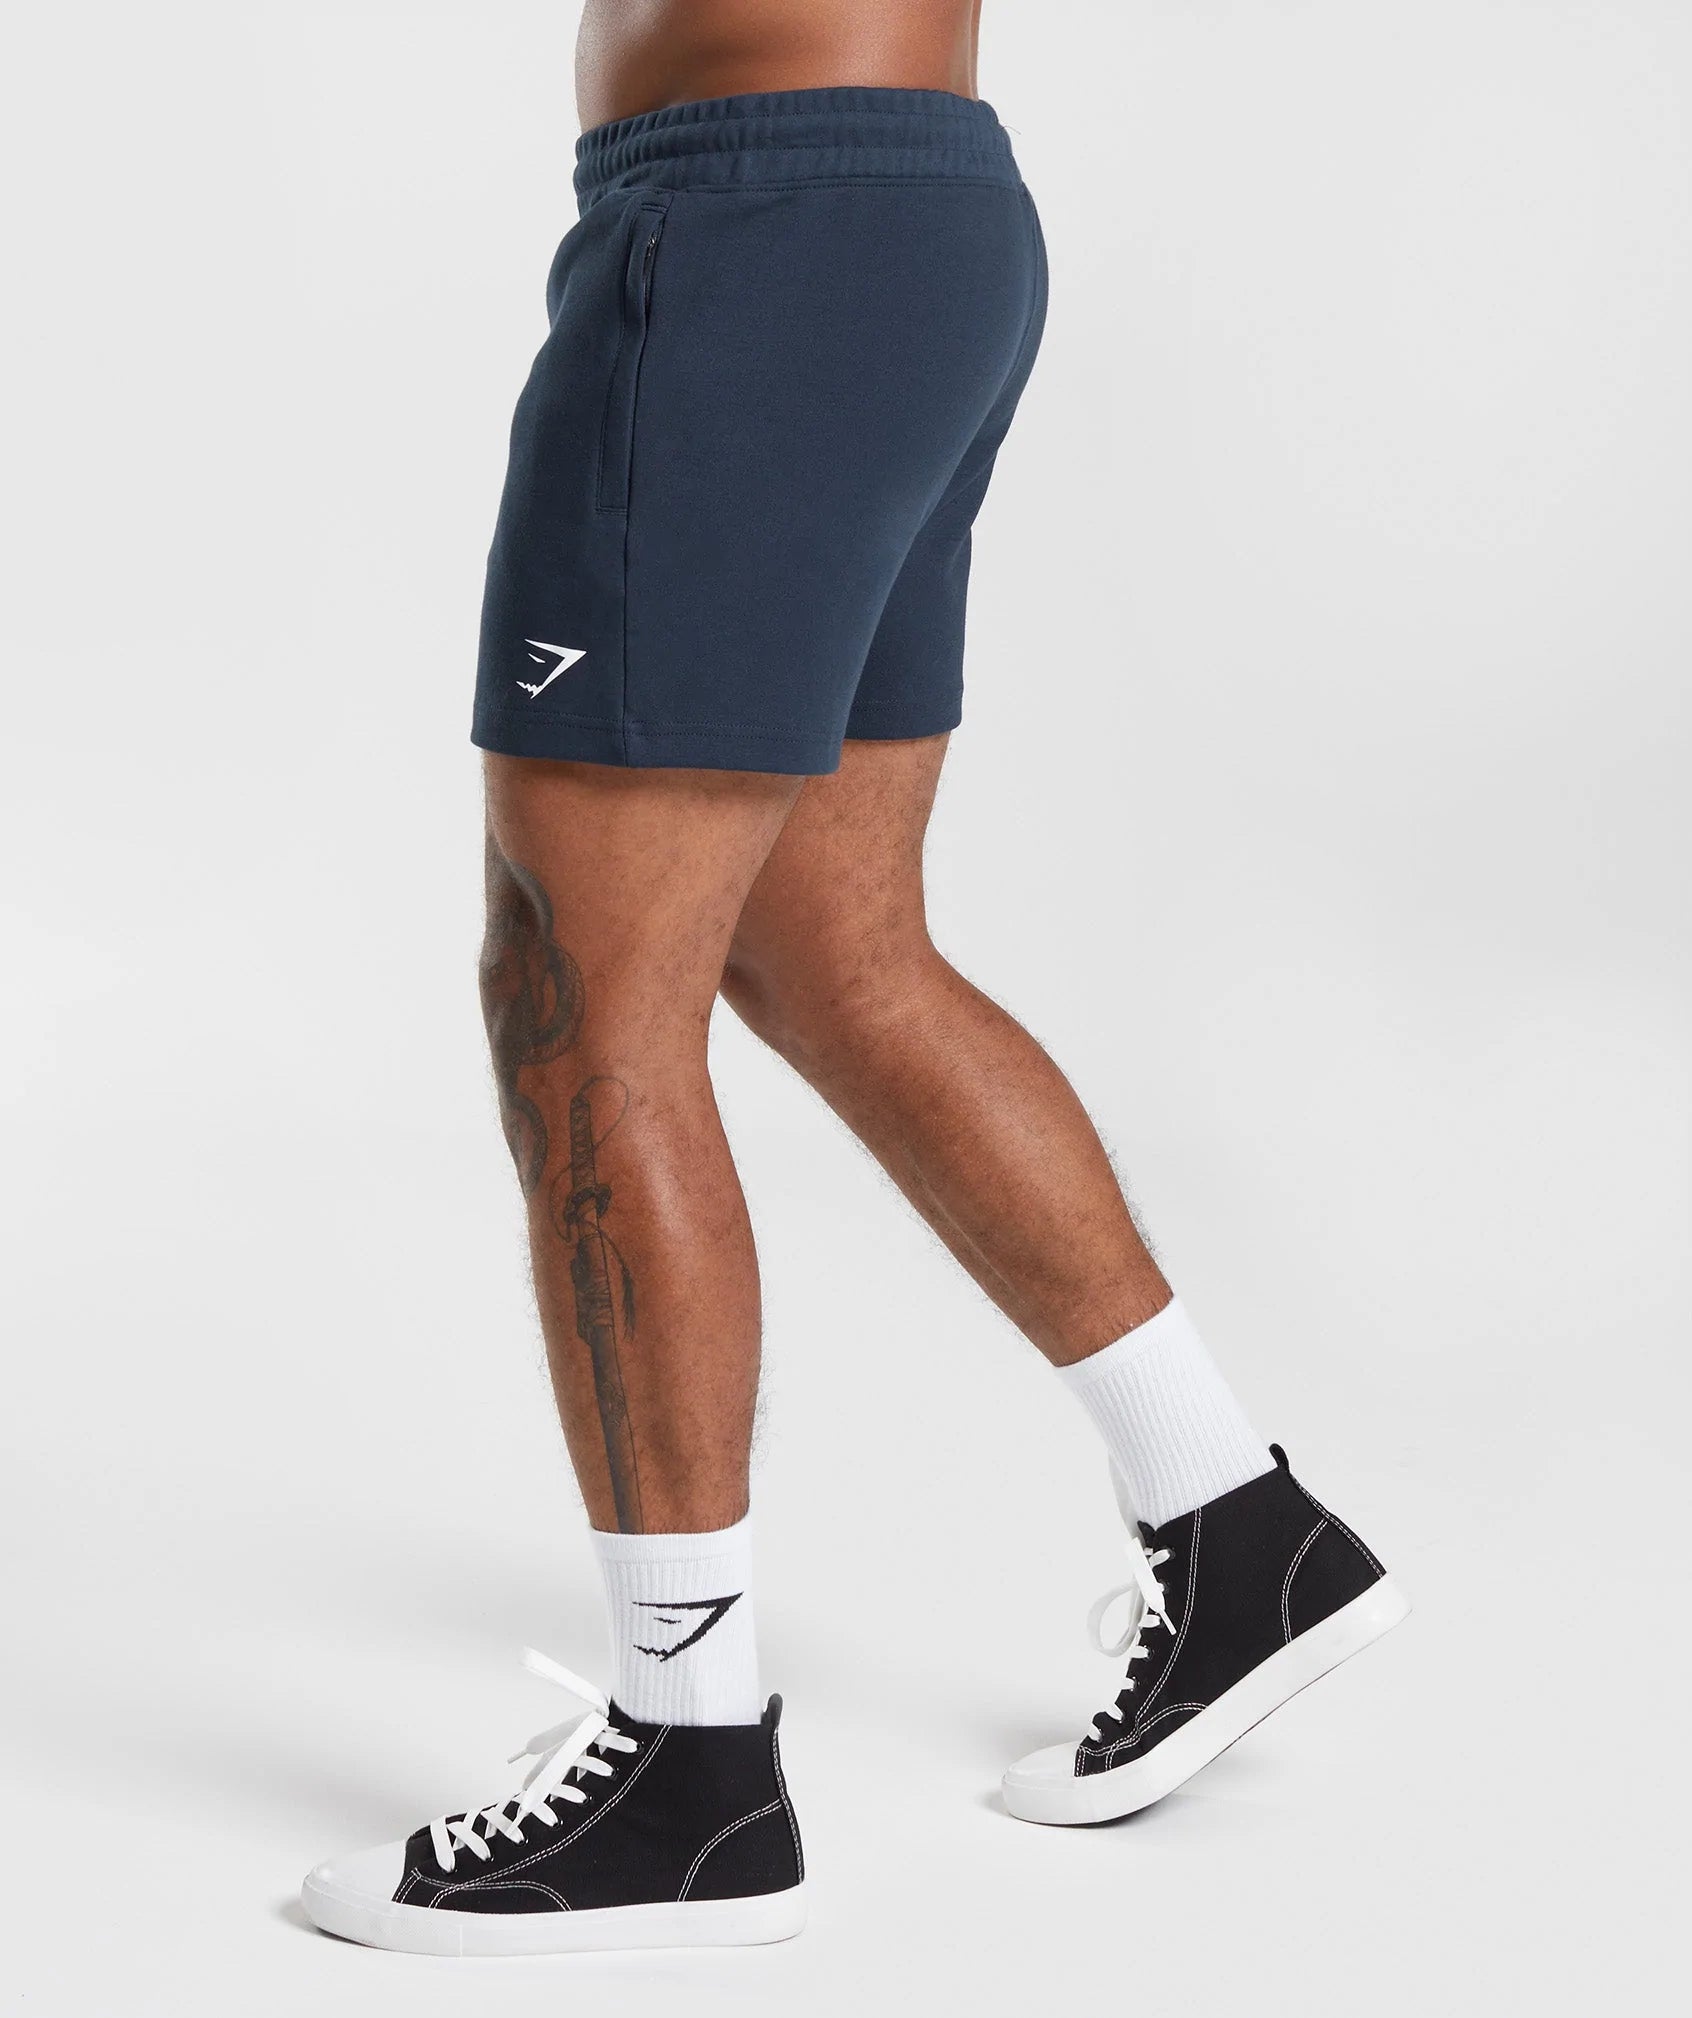 React 5" Shorts in Navy - view 3